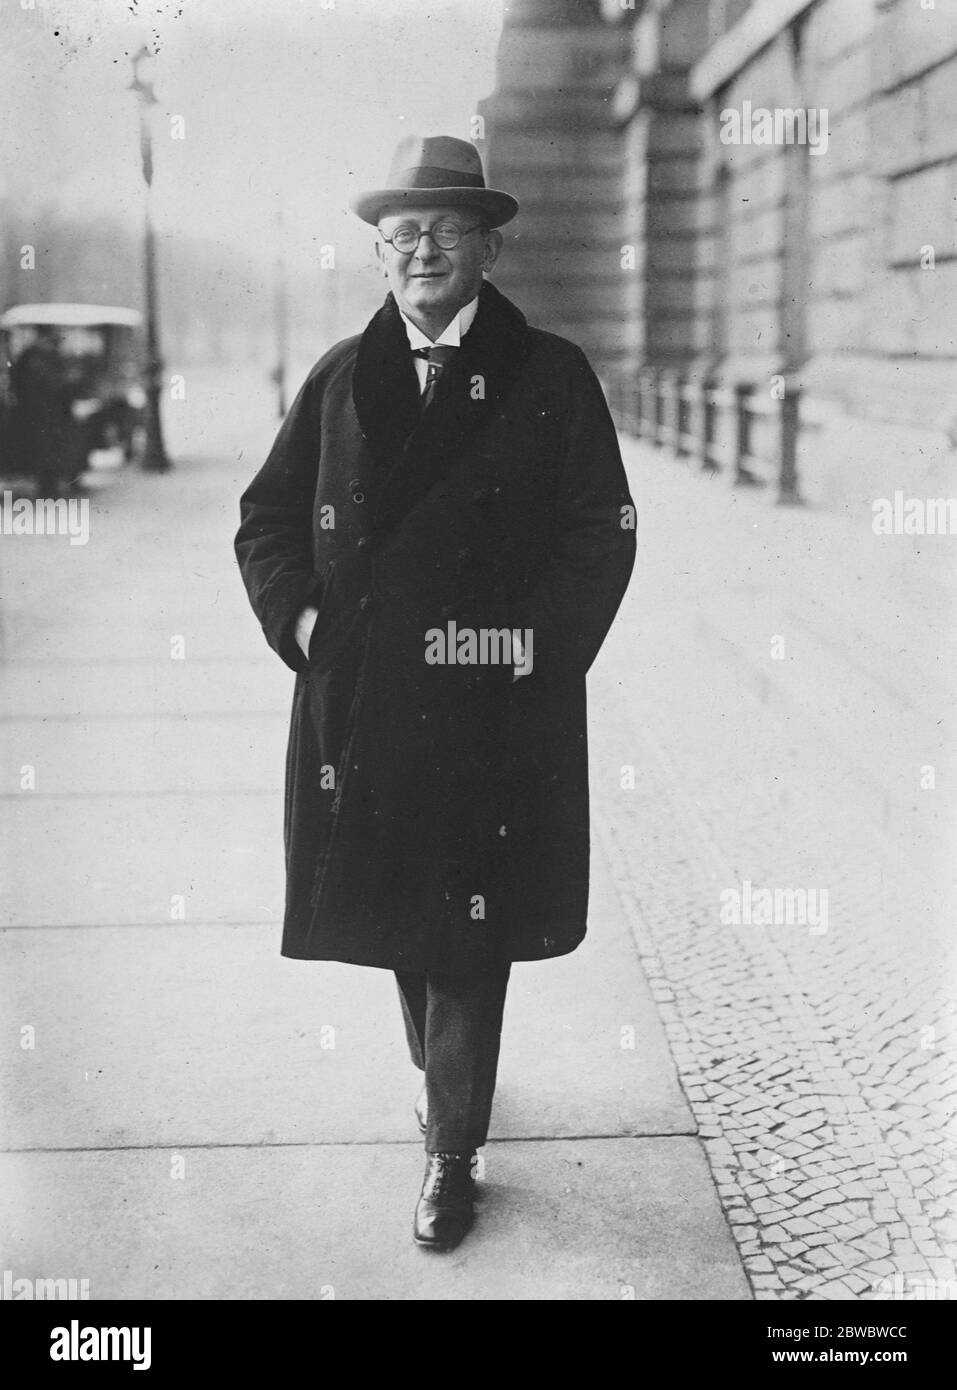 Democrat to form coalition government for Germany Herr Koch , leader of the Democrats , who has undertaken to form a Coalition Government for Germany 14 December 1925 Stock Photo